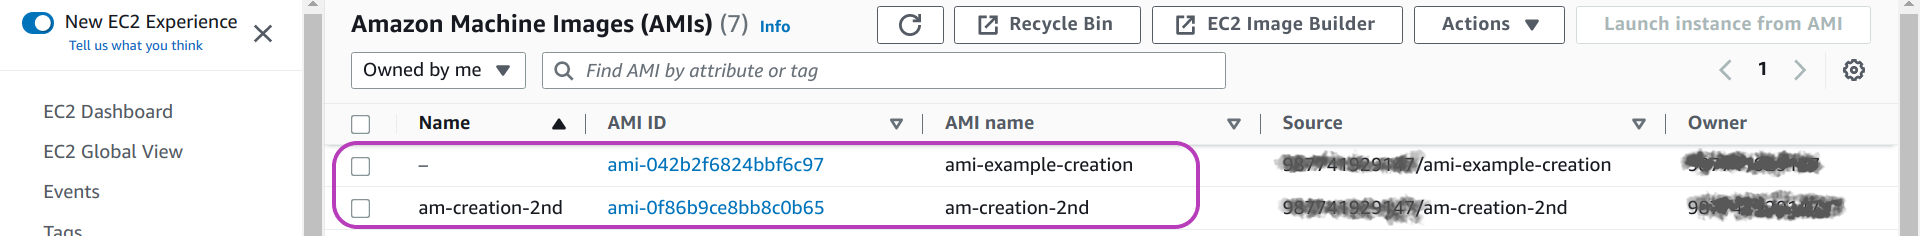 Screenshot of AWS Console "Amazon Machine Images (AMIs)" page in a browser, showing a table listing AMIs properties and two AMI entries in the table circled.